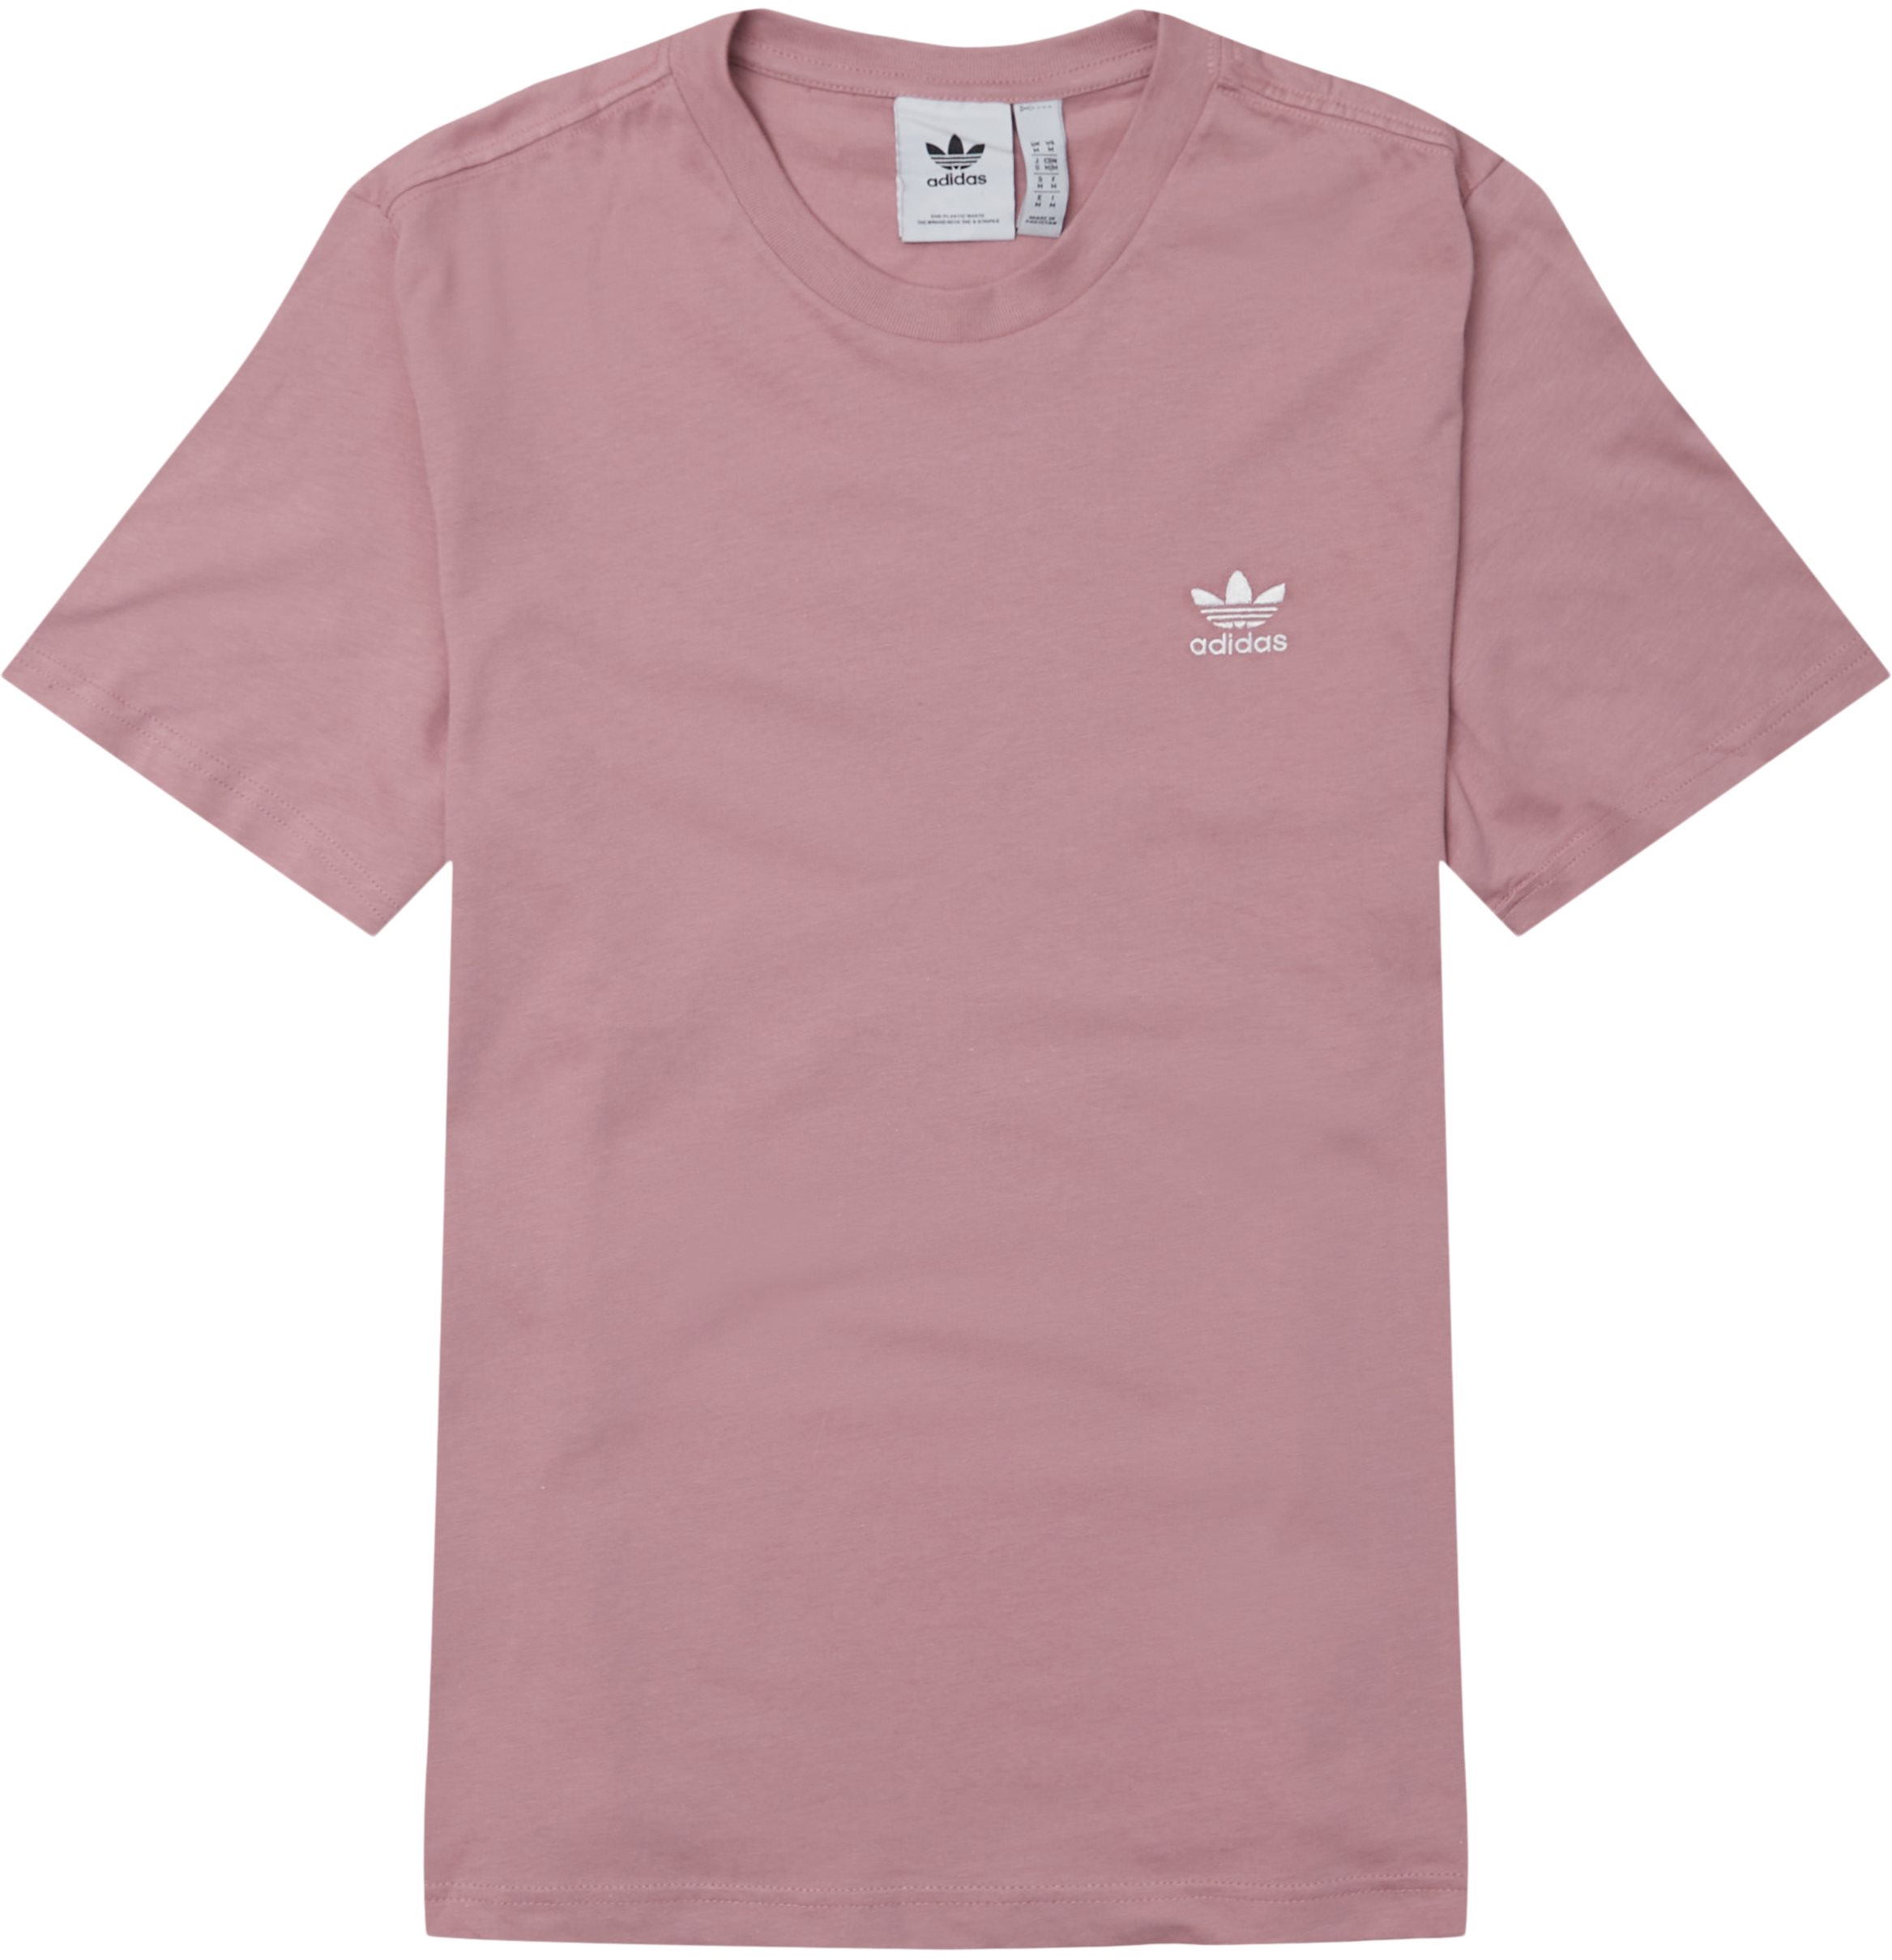 Essential Tee  - T-shirts - Regular fit - Pink